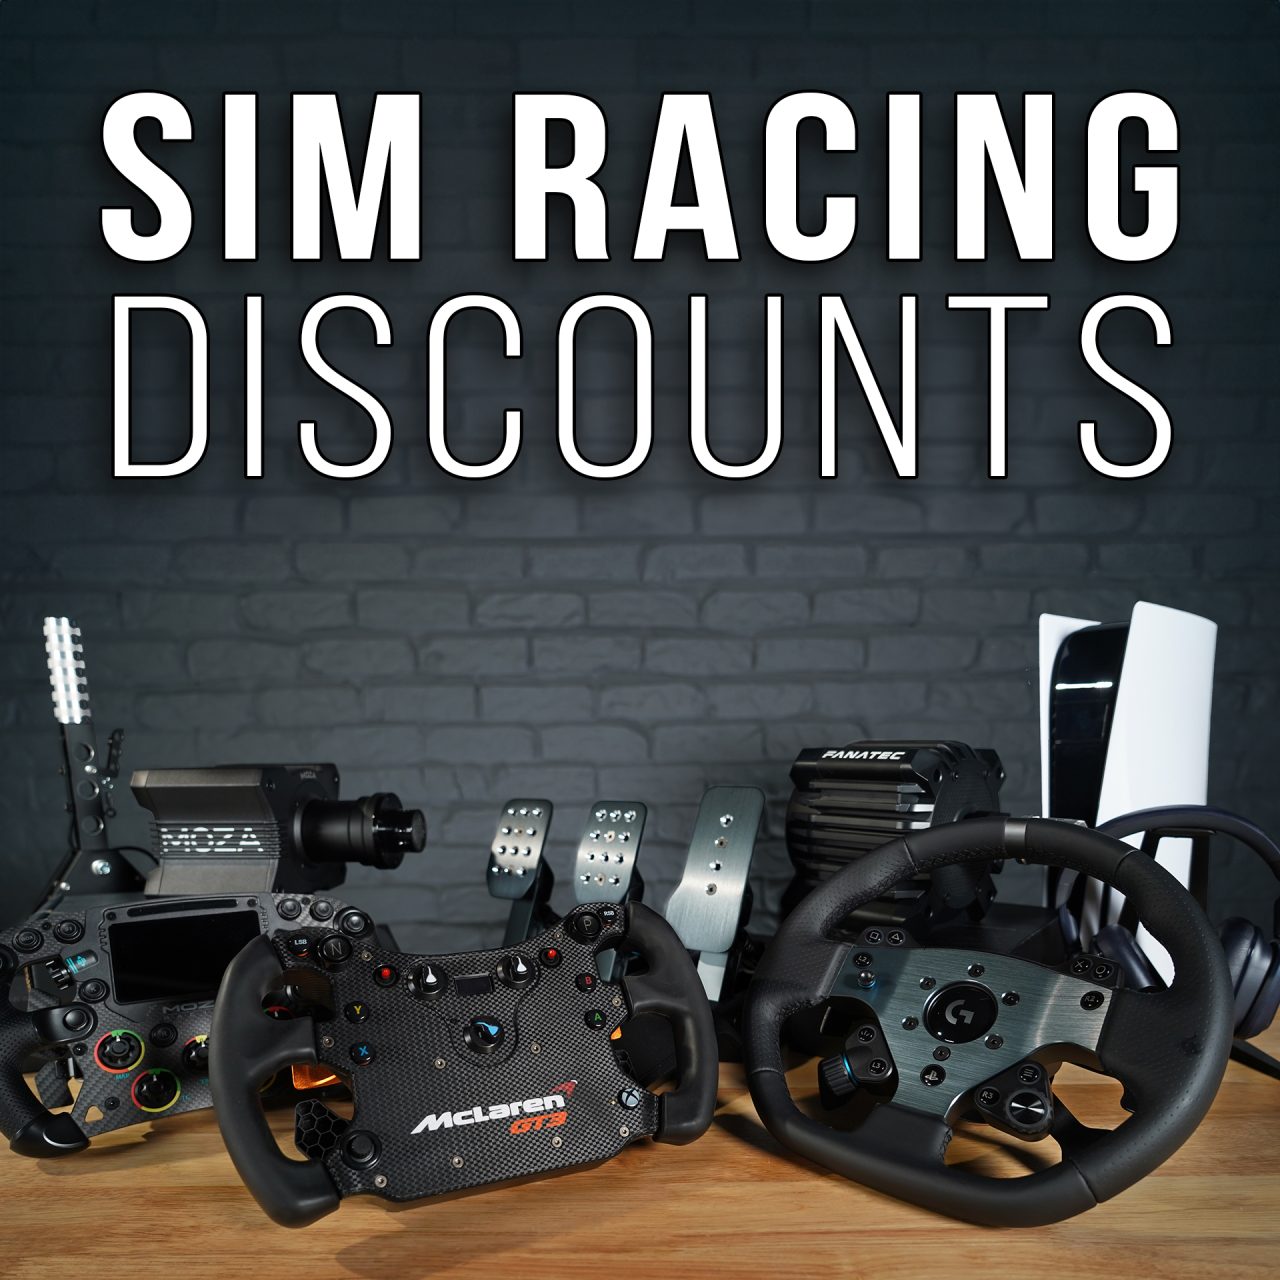 Sim Racing Reviews, Guides, Discounts & More - Boosted Media